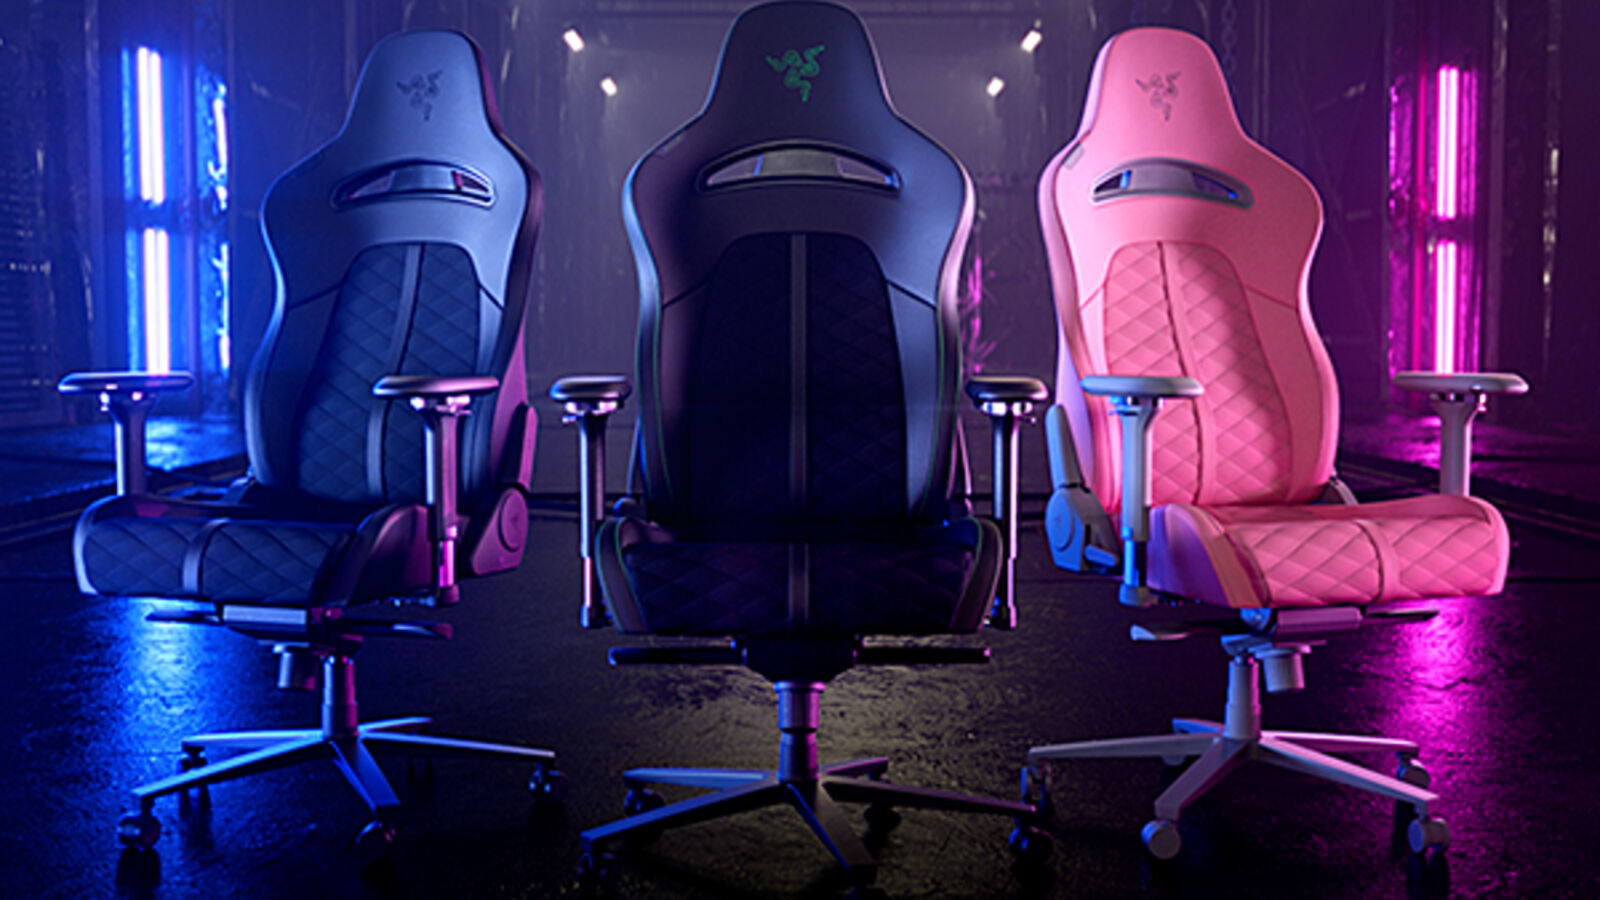 Get big savings on Razer gaming chairs and laptops in the Chroma Mania sale